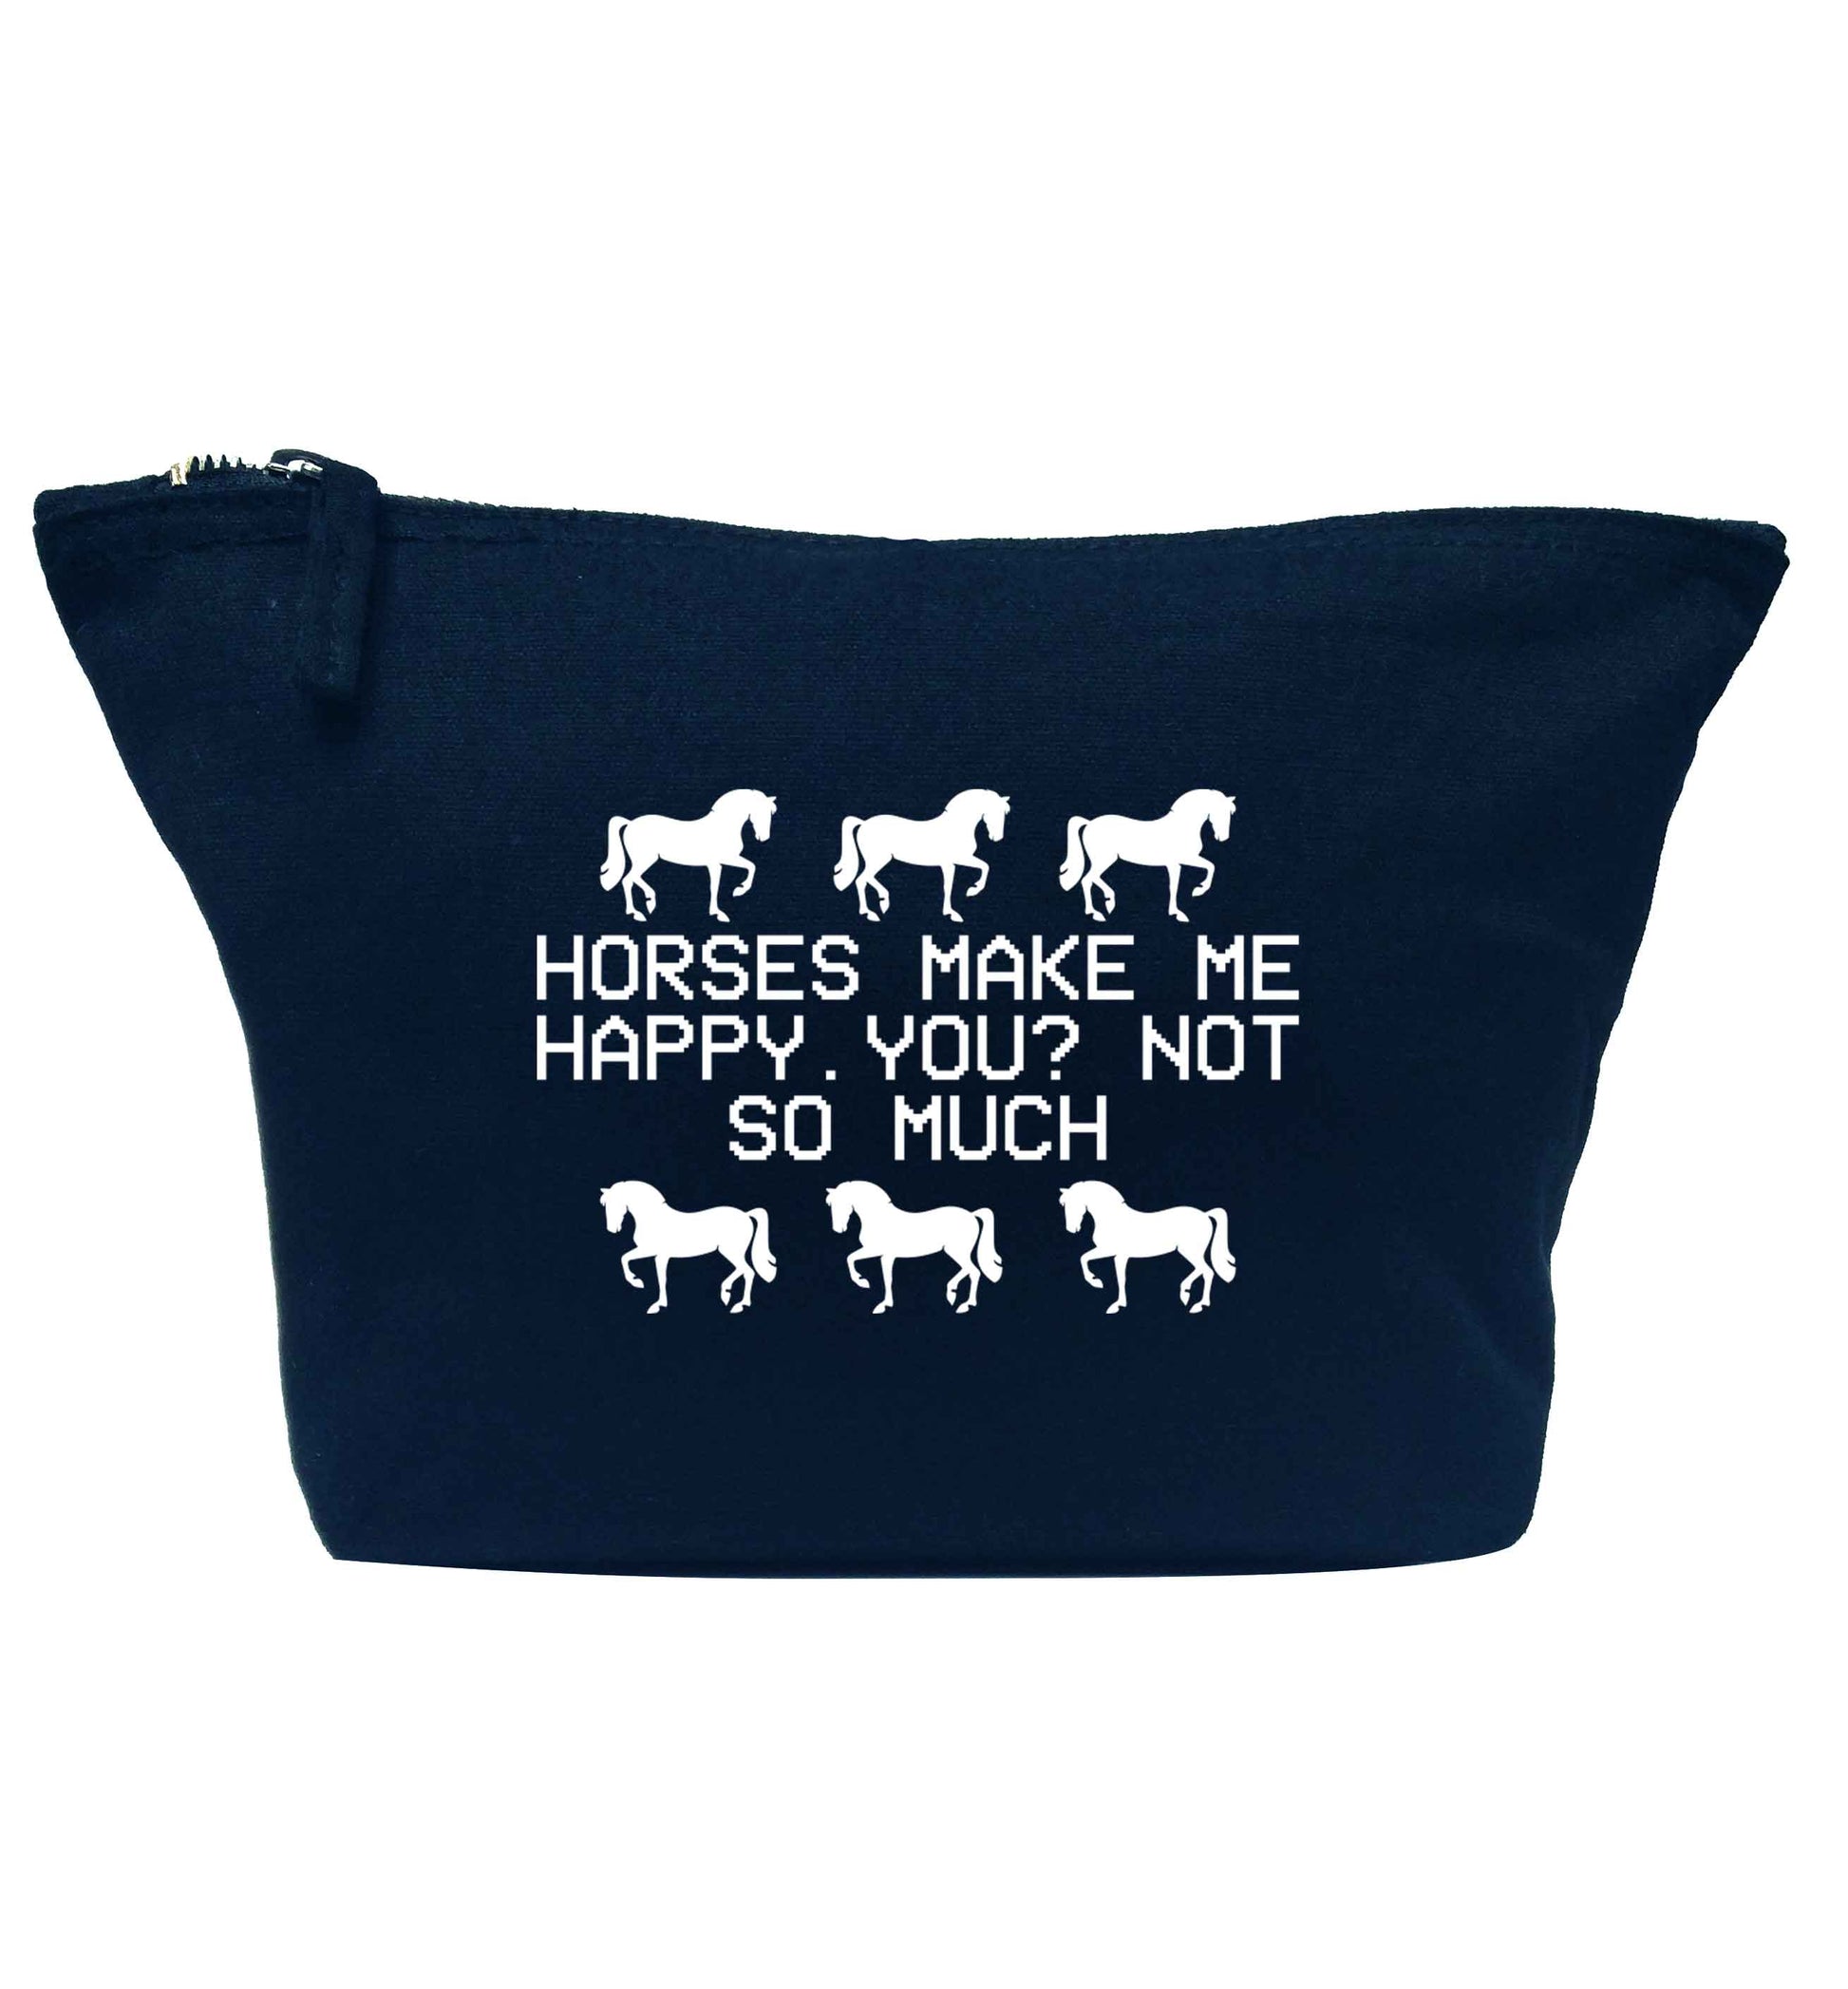 Horses make me happy, you not so much navy makeup bag